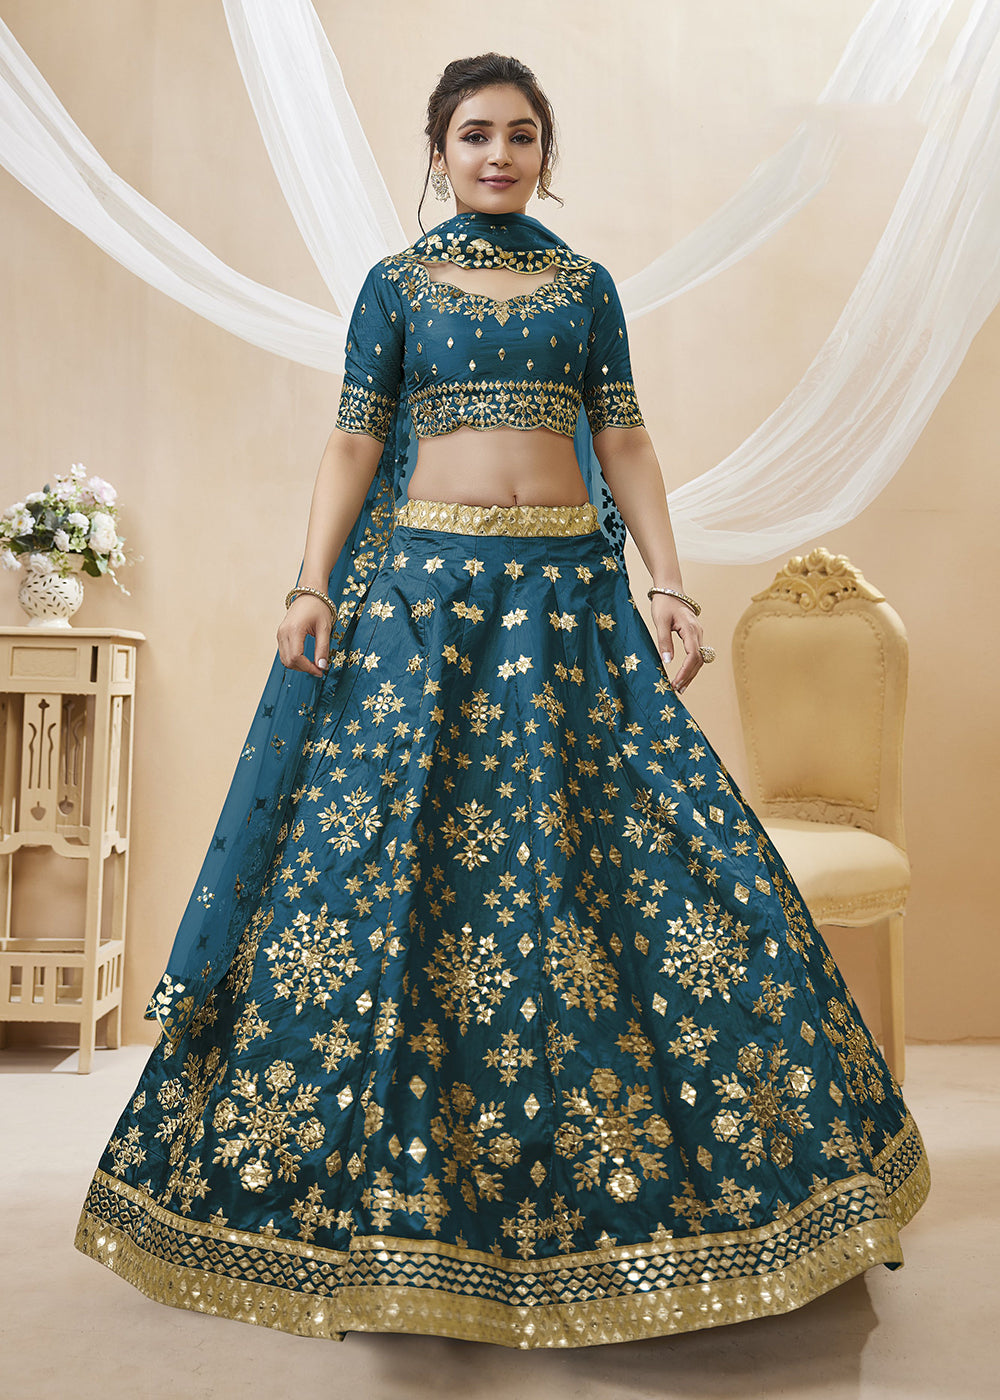 Buy Now Prussian Blue Art Silk Embroidered Reception Wear Lehenga Choli Online in USA, UK, Canada & Worldwide at Empress Clothing.